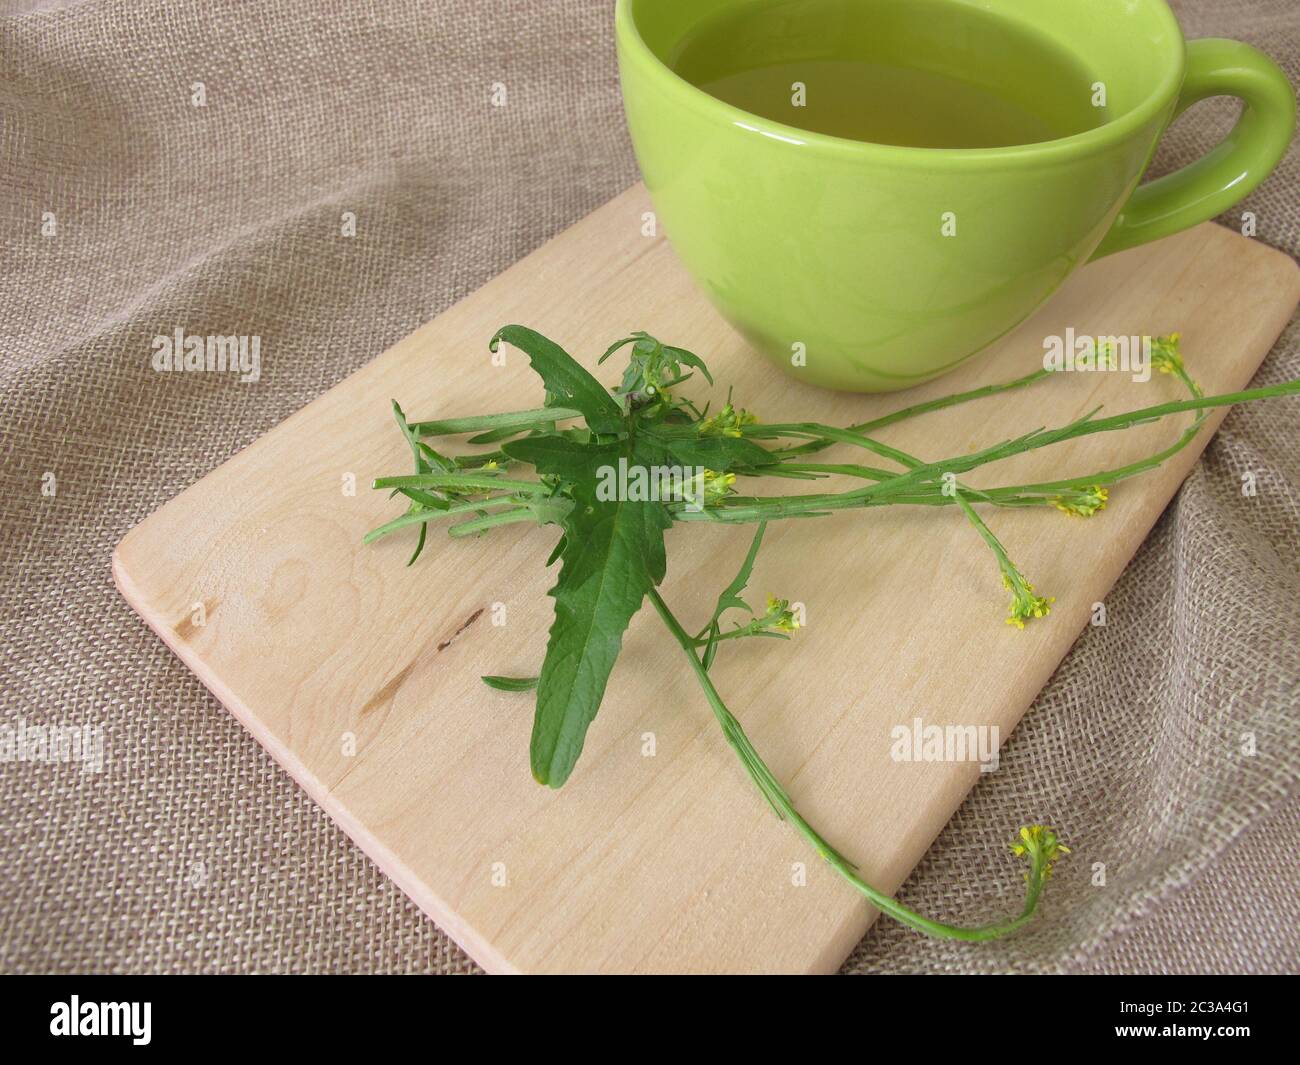 A cup of tea with hedge mustard Stock Photo